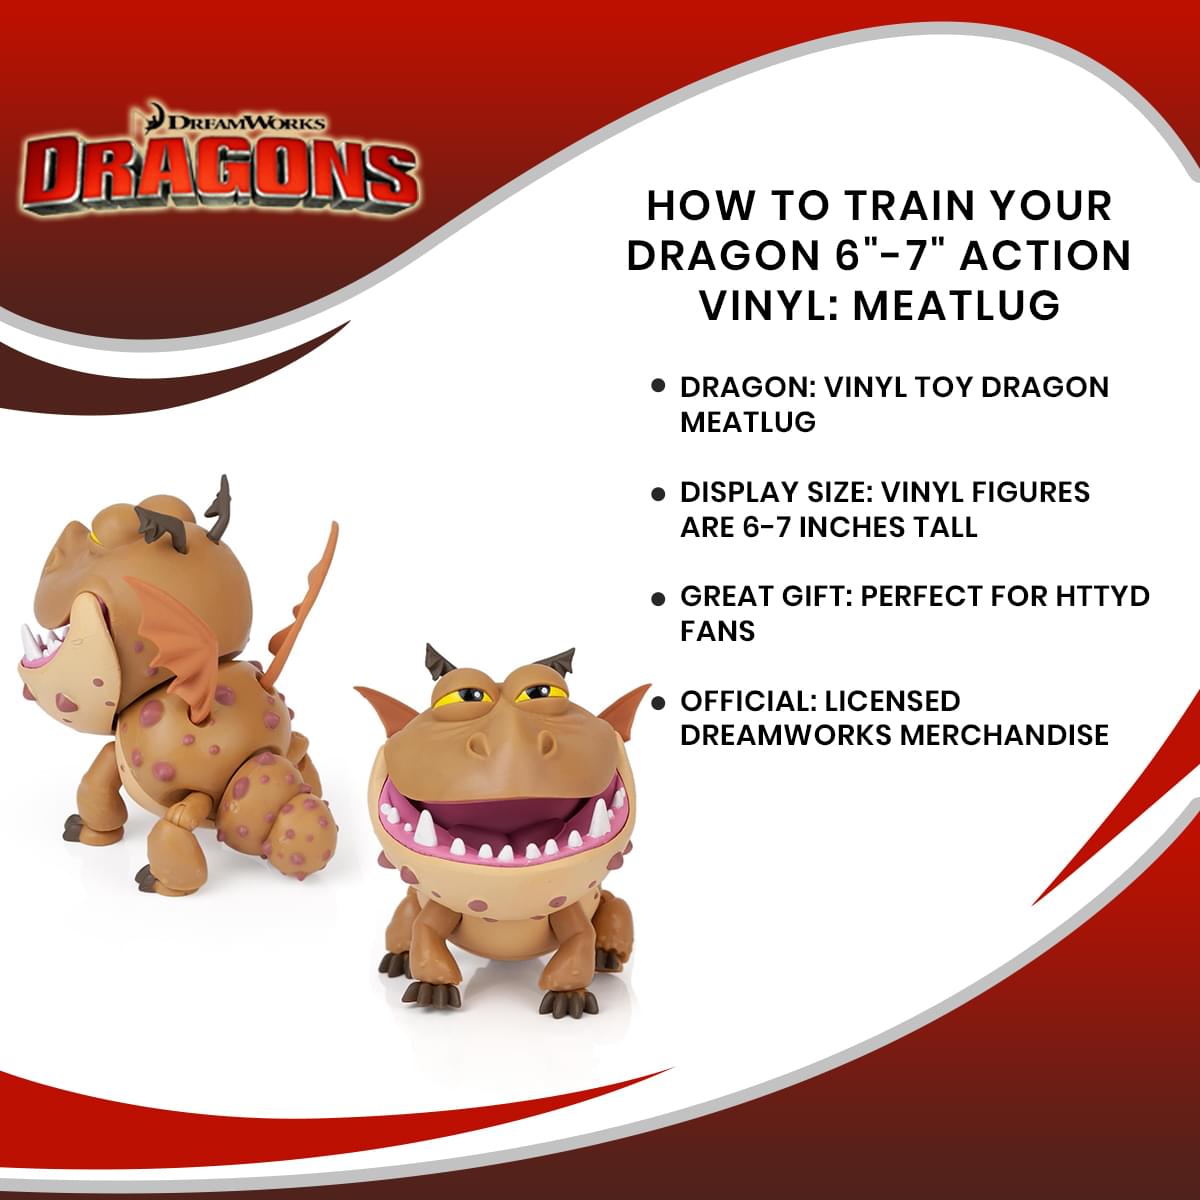 How To Train Your Dragon 6"-7" Action Vinyl: Meatlug